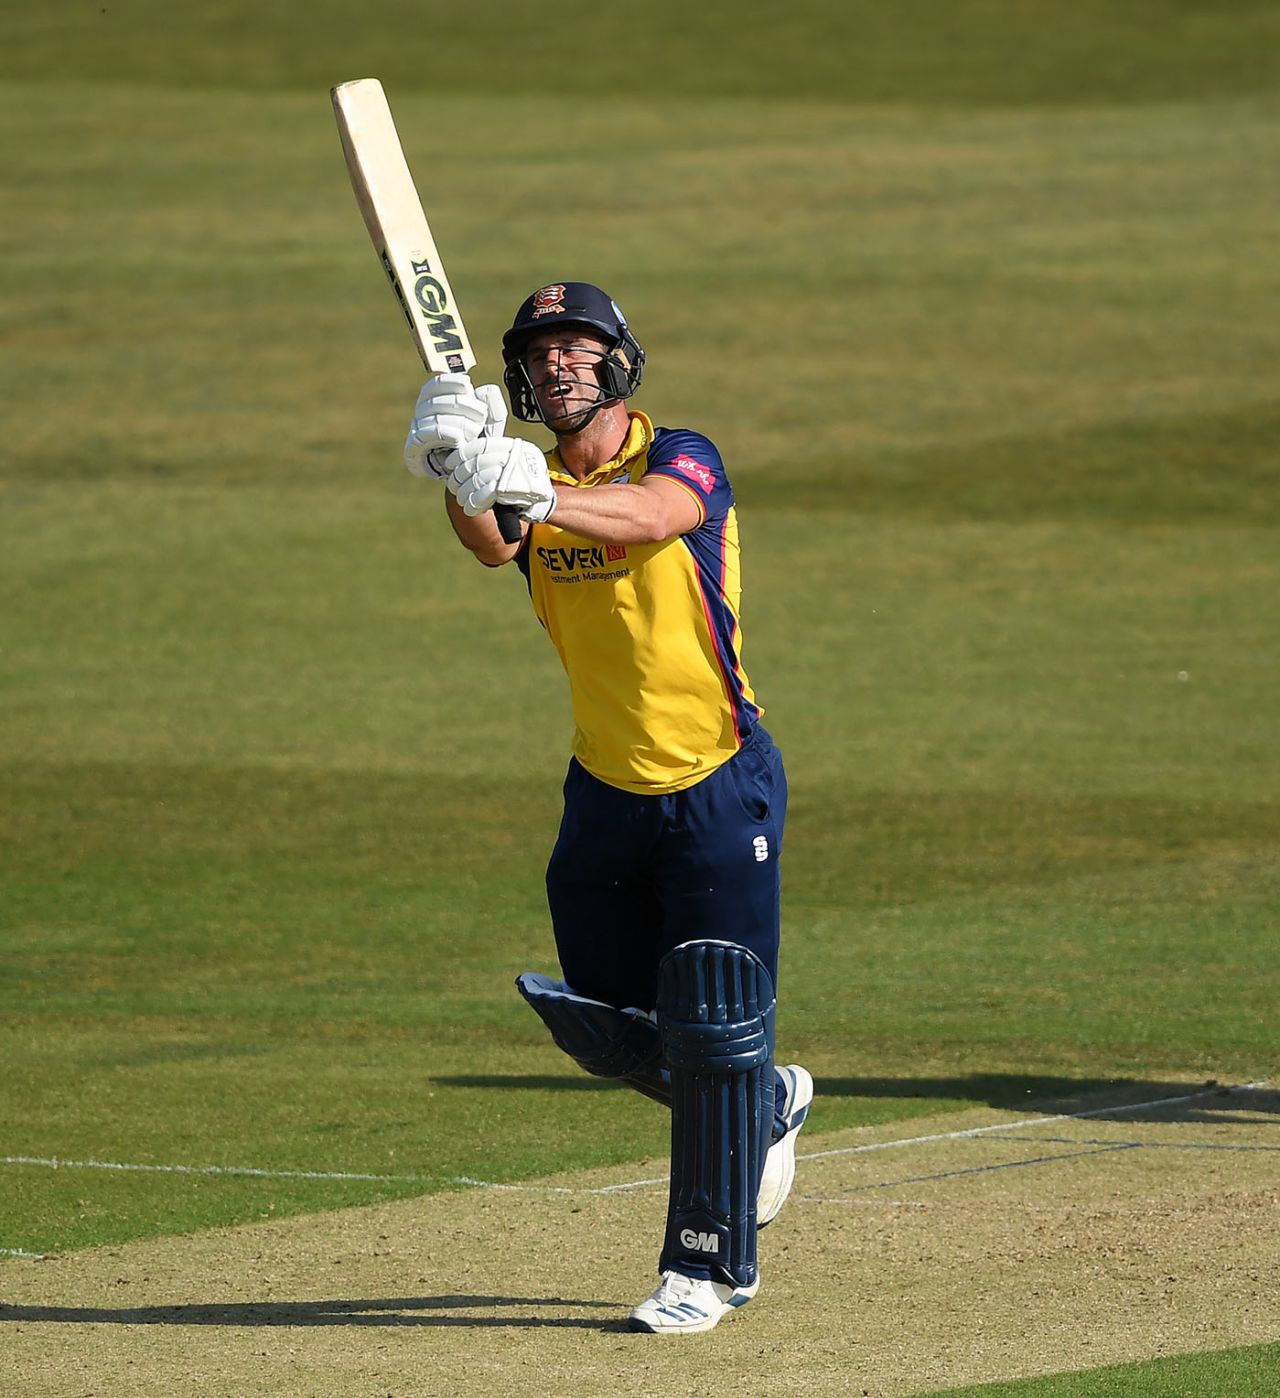 Ryan ten Doeschate comes down the pitch, Kent v Essex, Canterbury, Vitality Blast, September 18, 2020